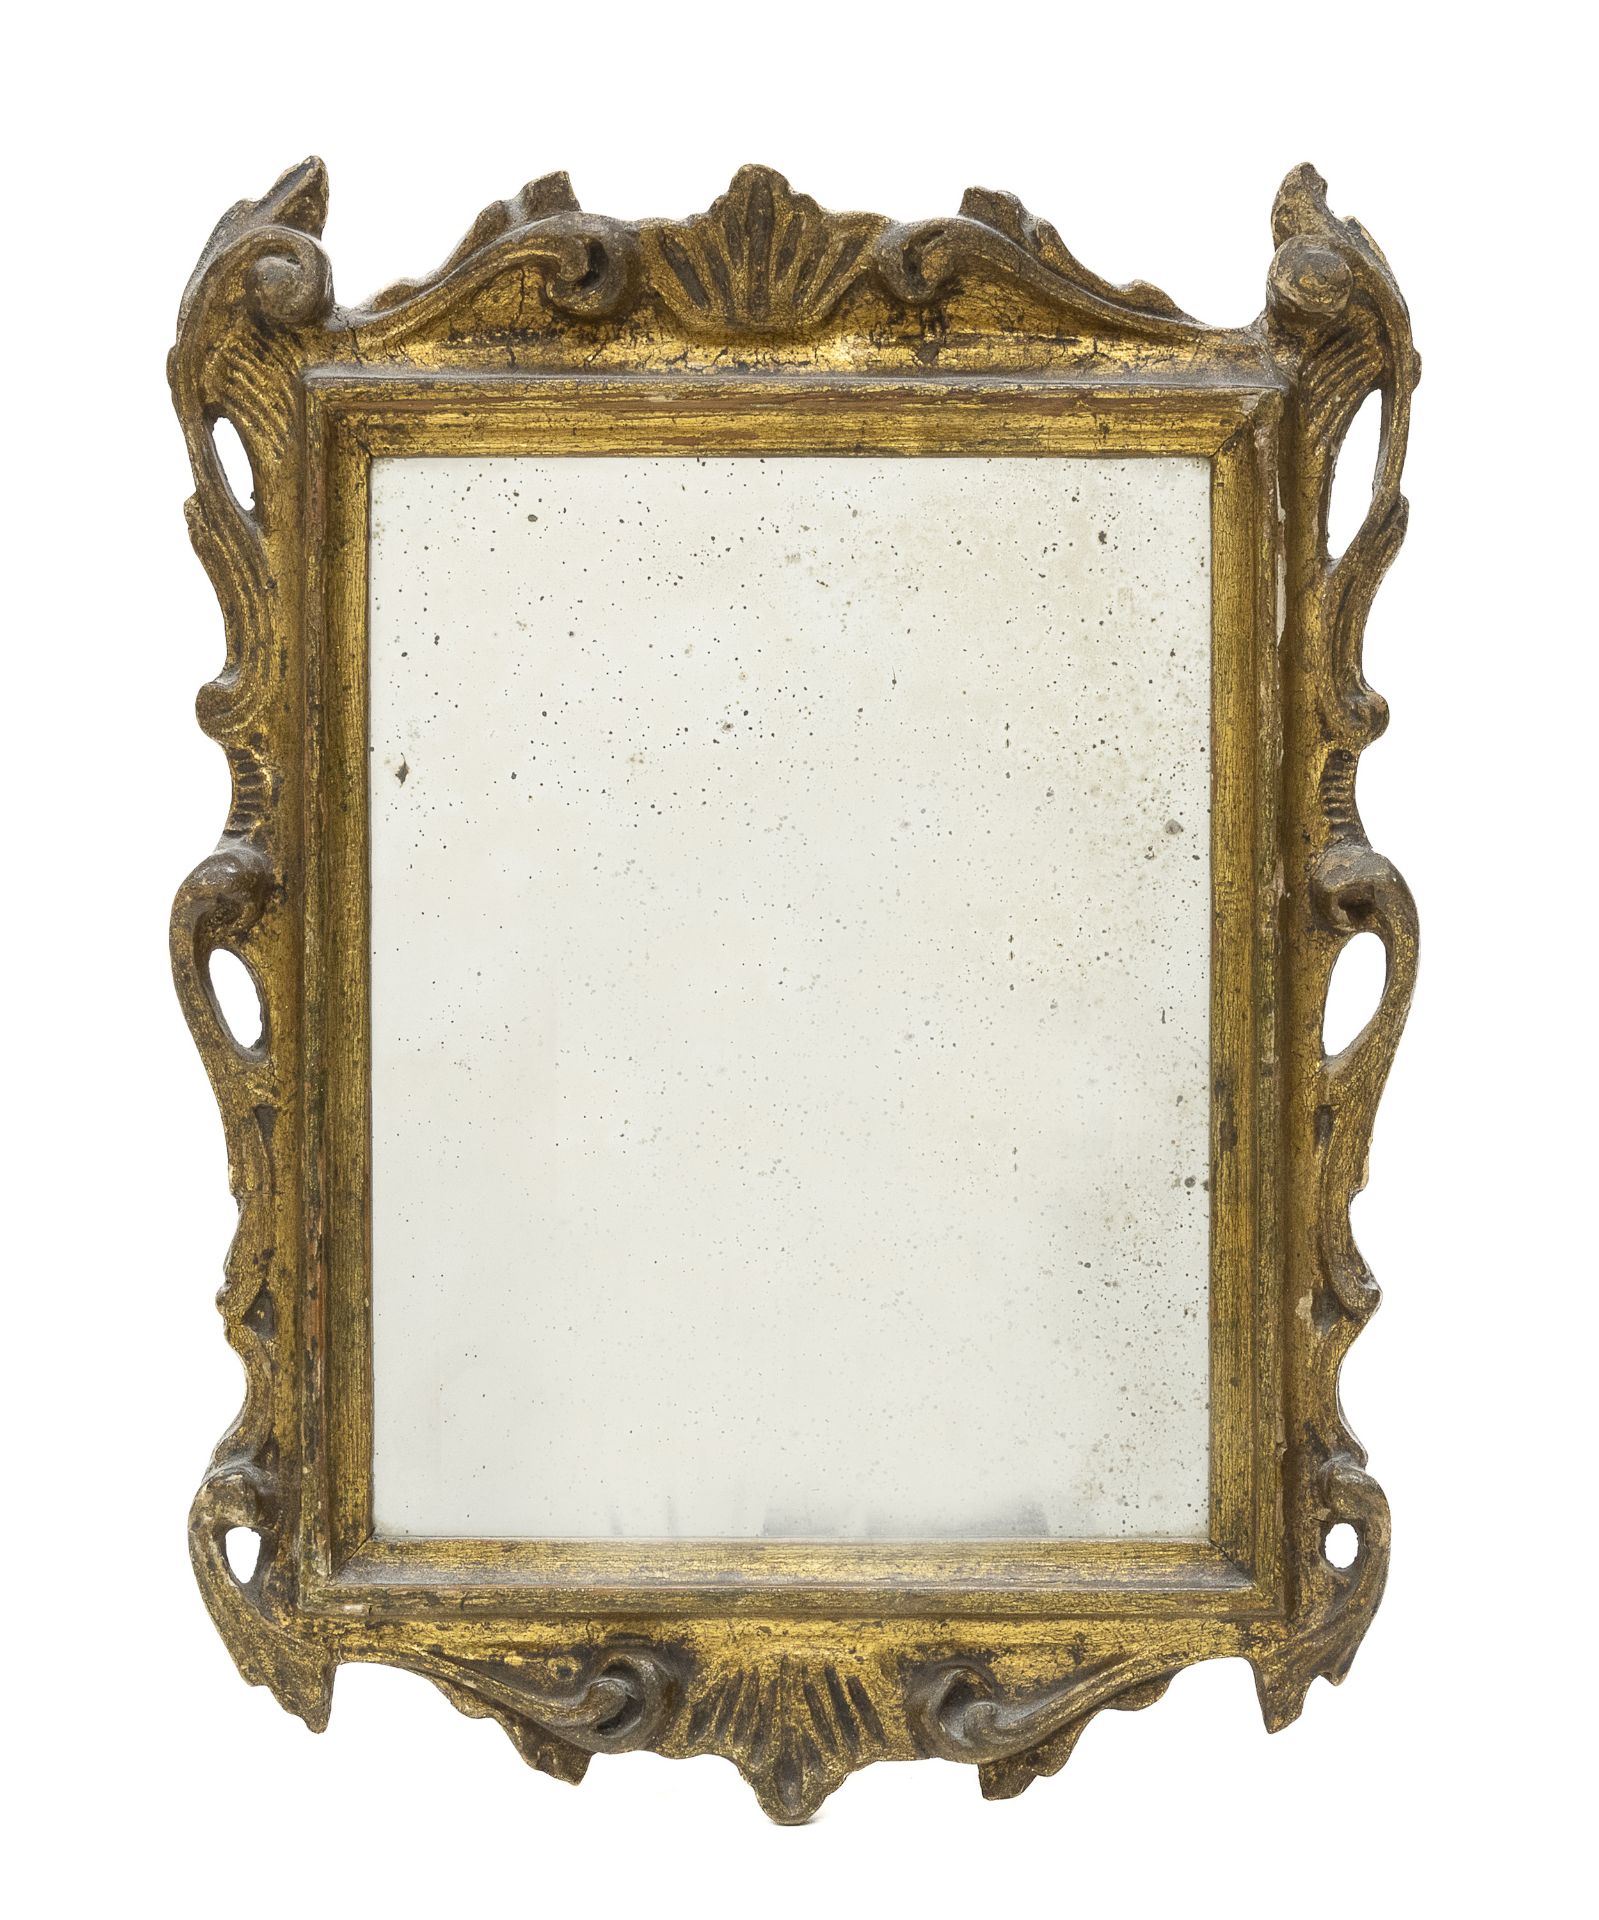 GILTWOOD MIRROR END OF THE 19TH CENTURY